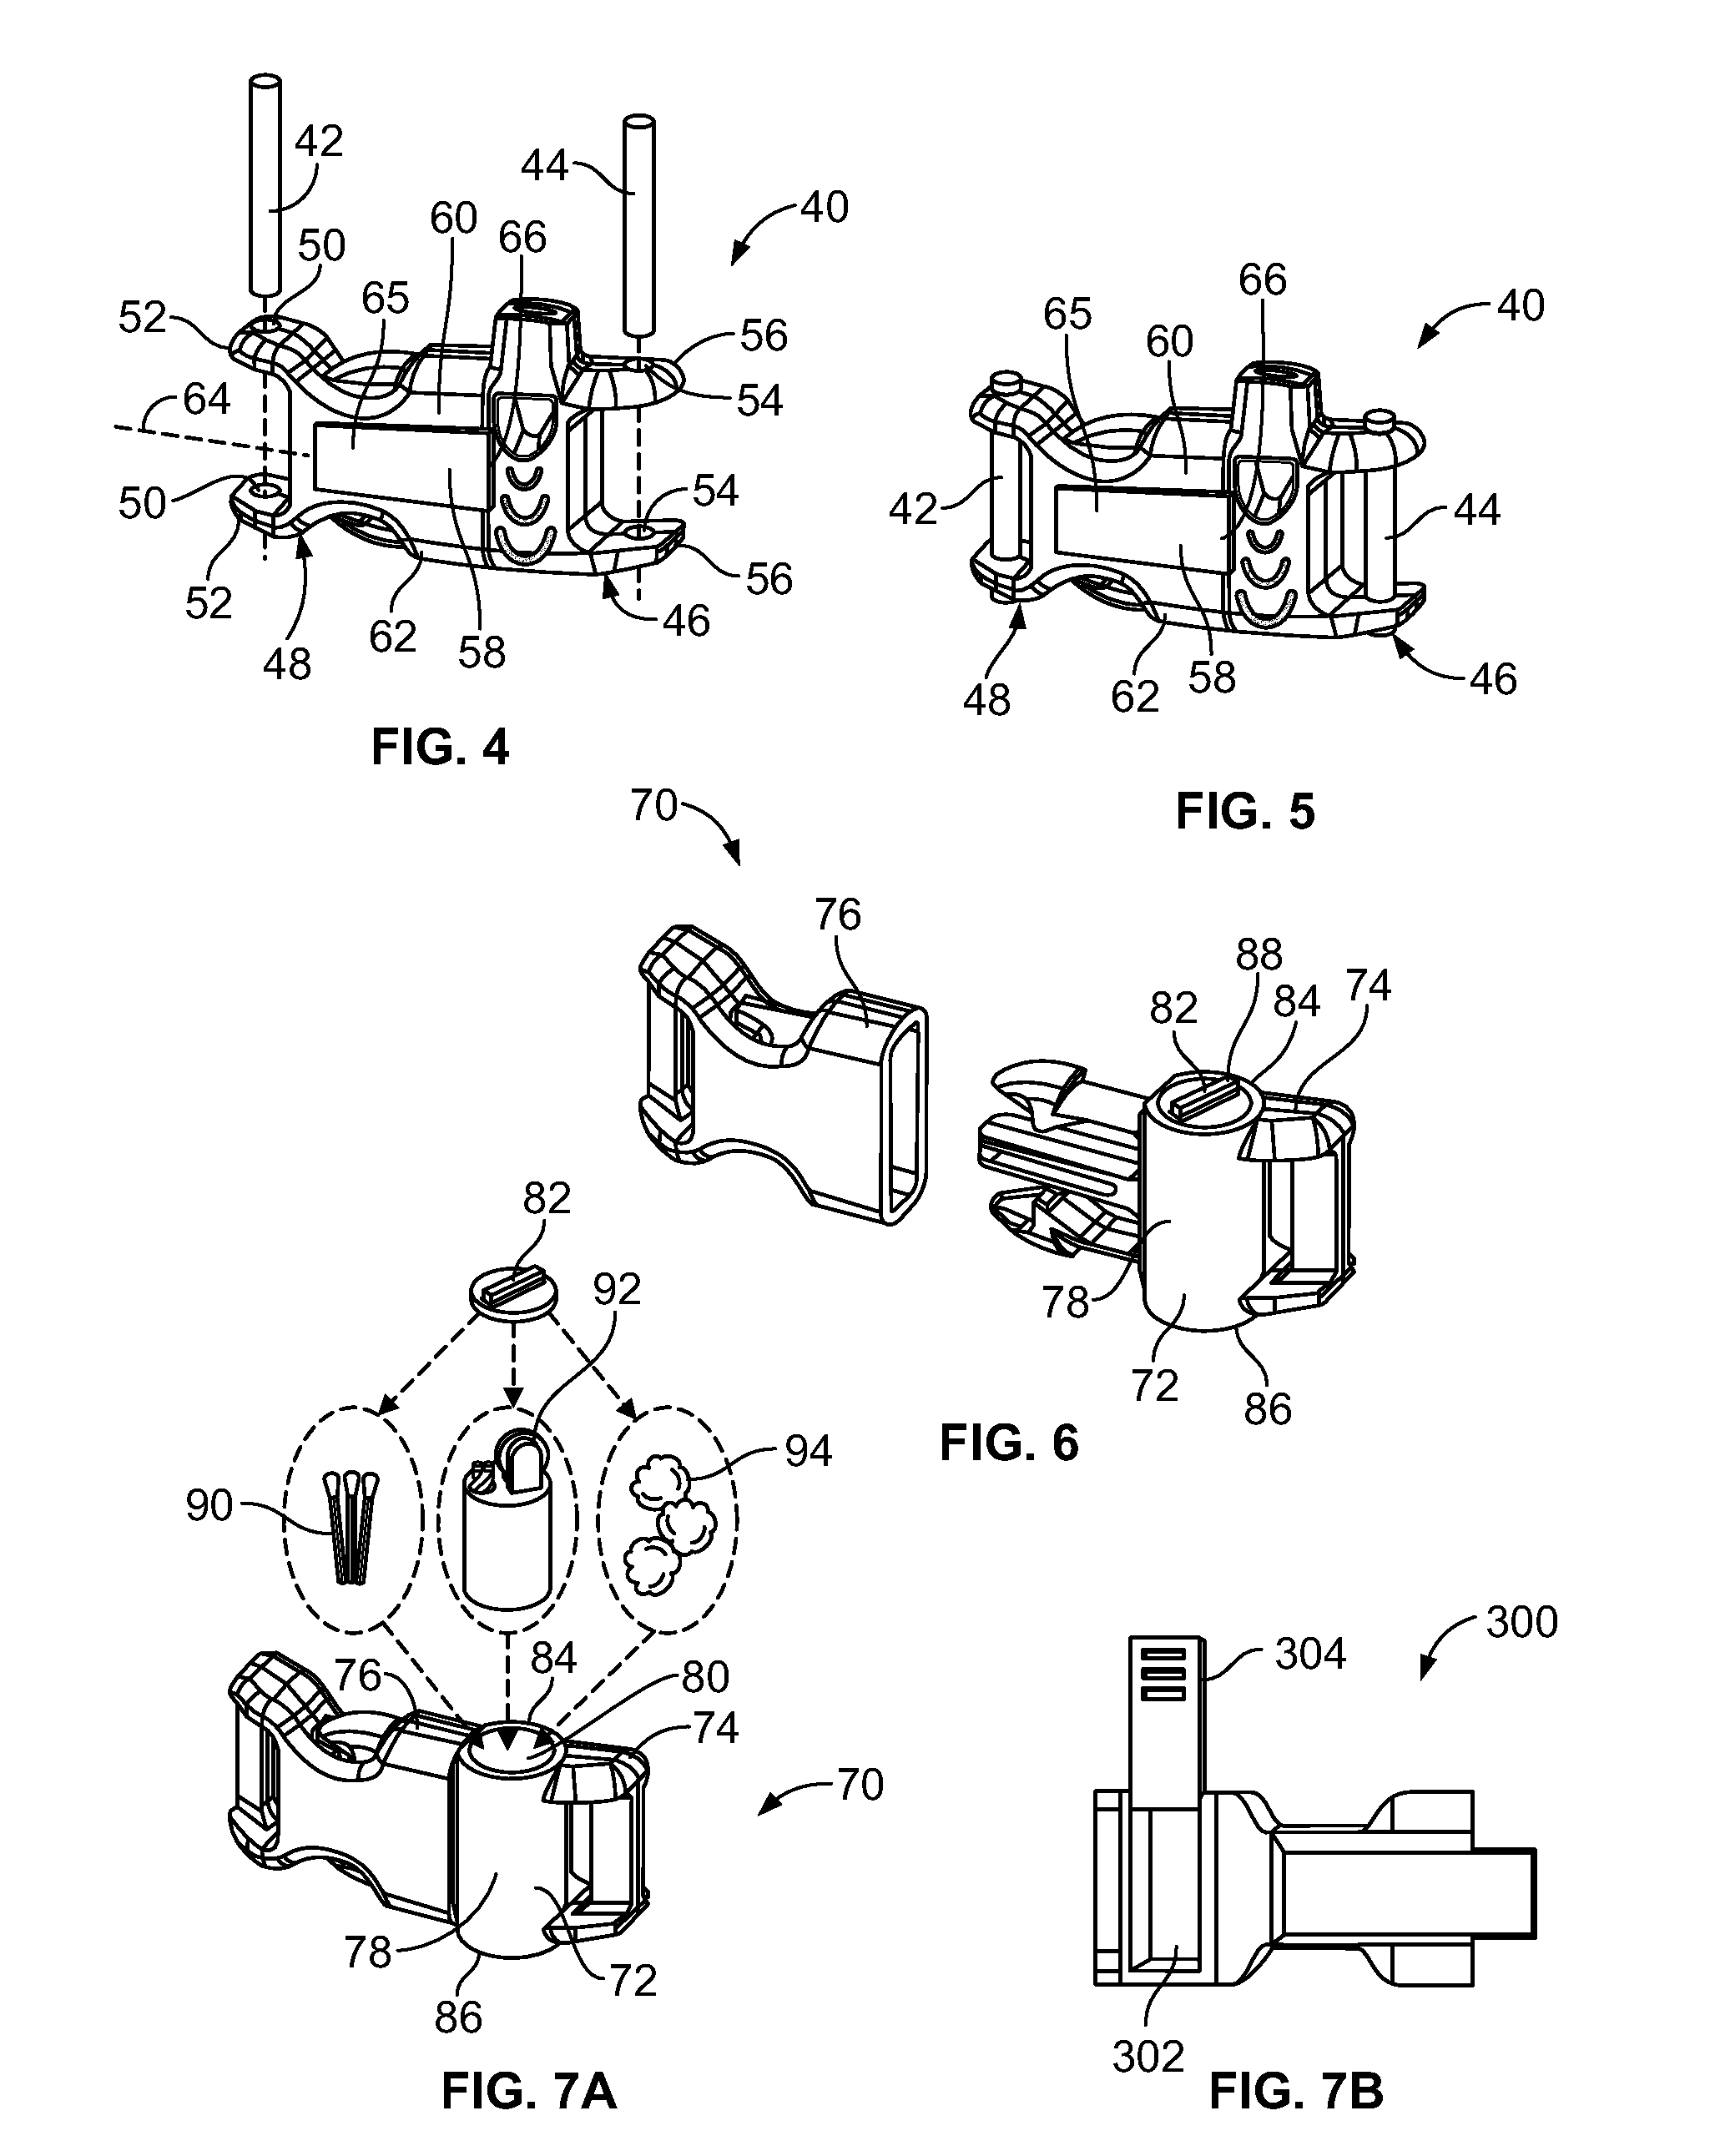 Strap-securing device with integral fire starter